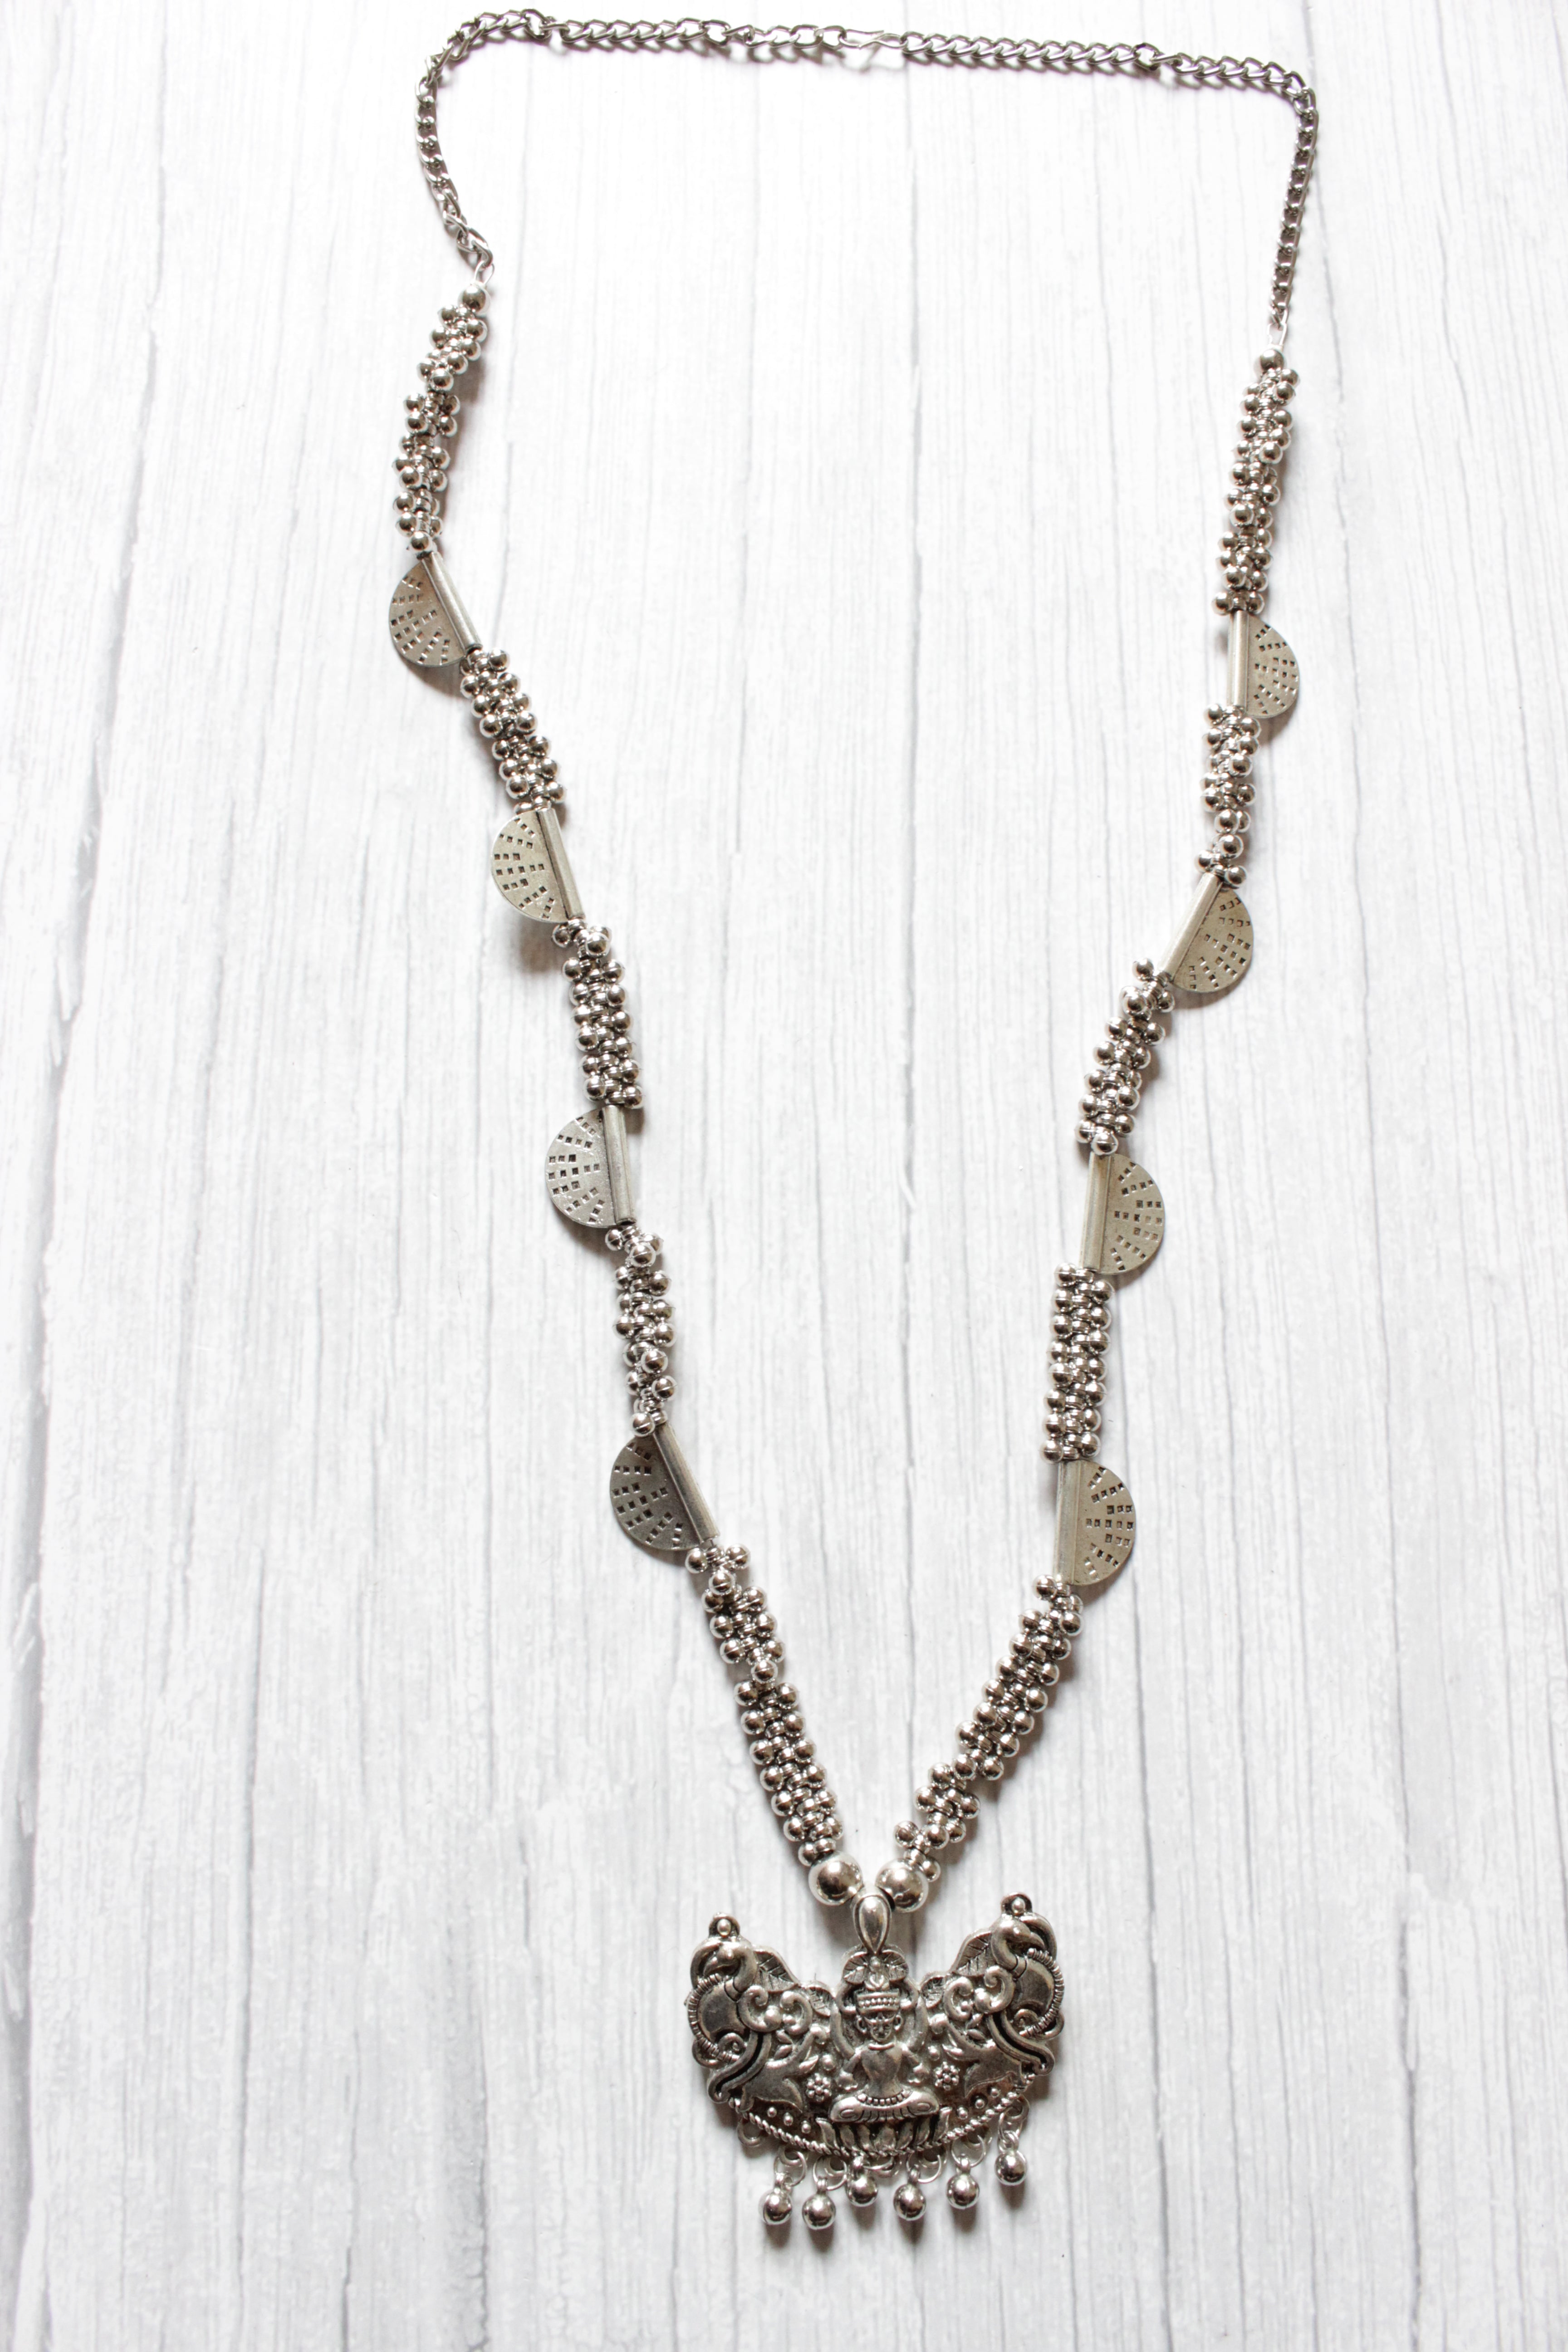 Silver Finish Long Chain Metal Necklace